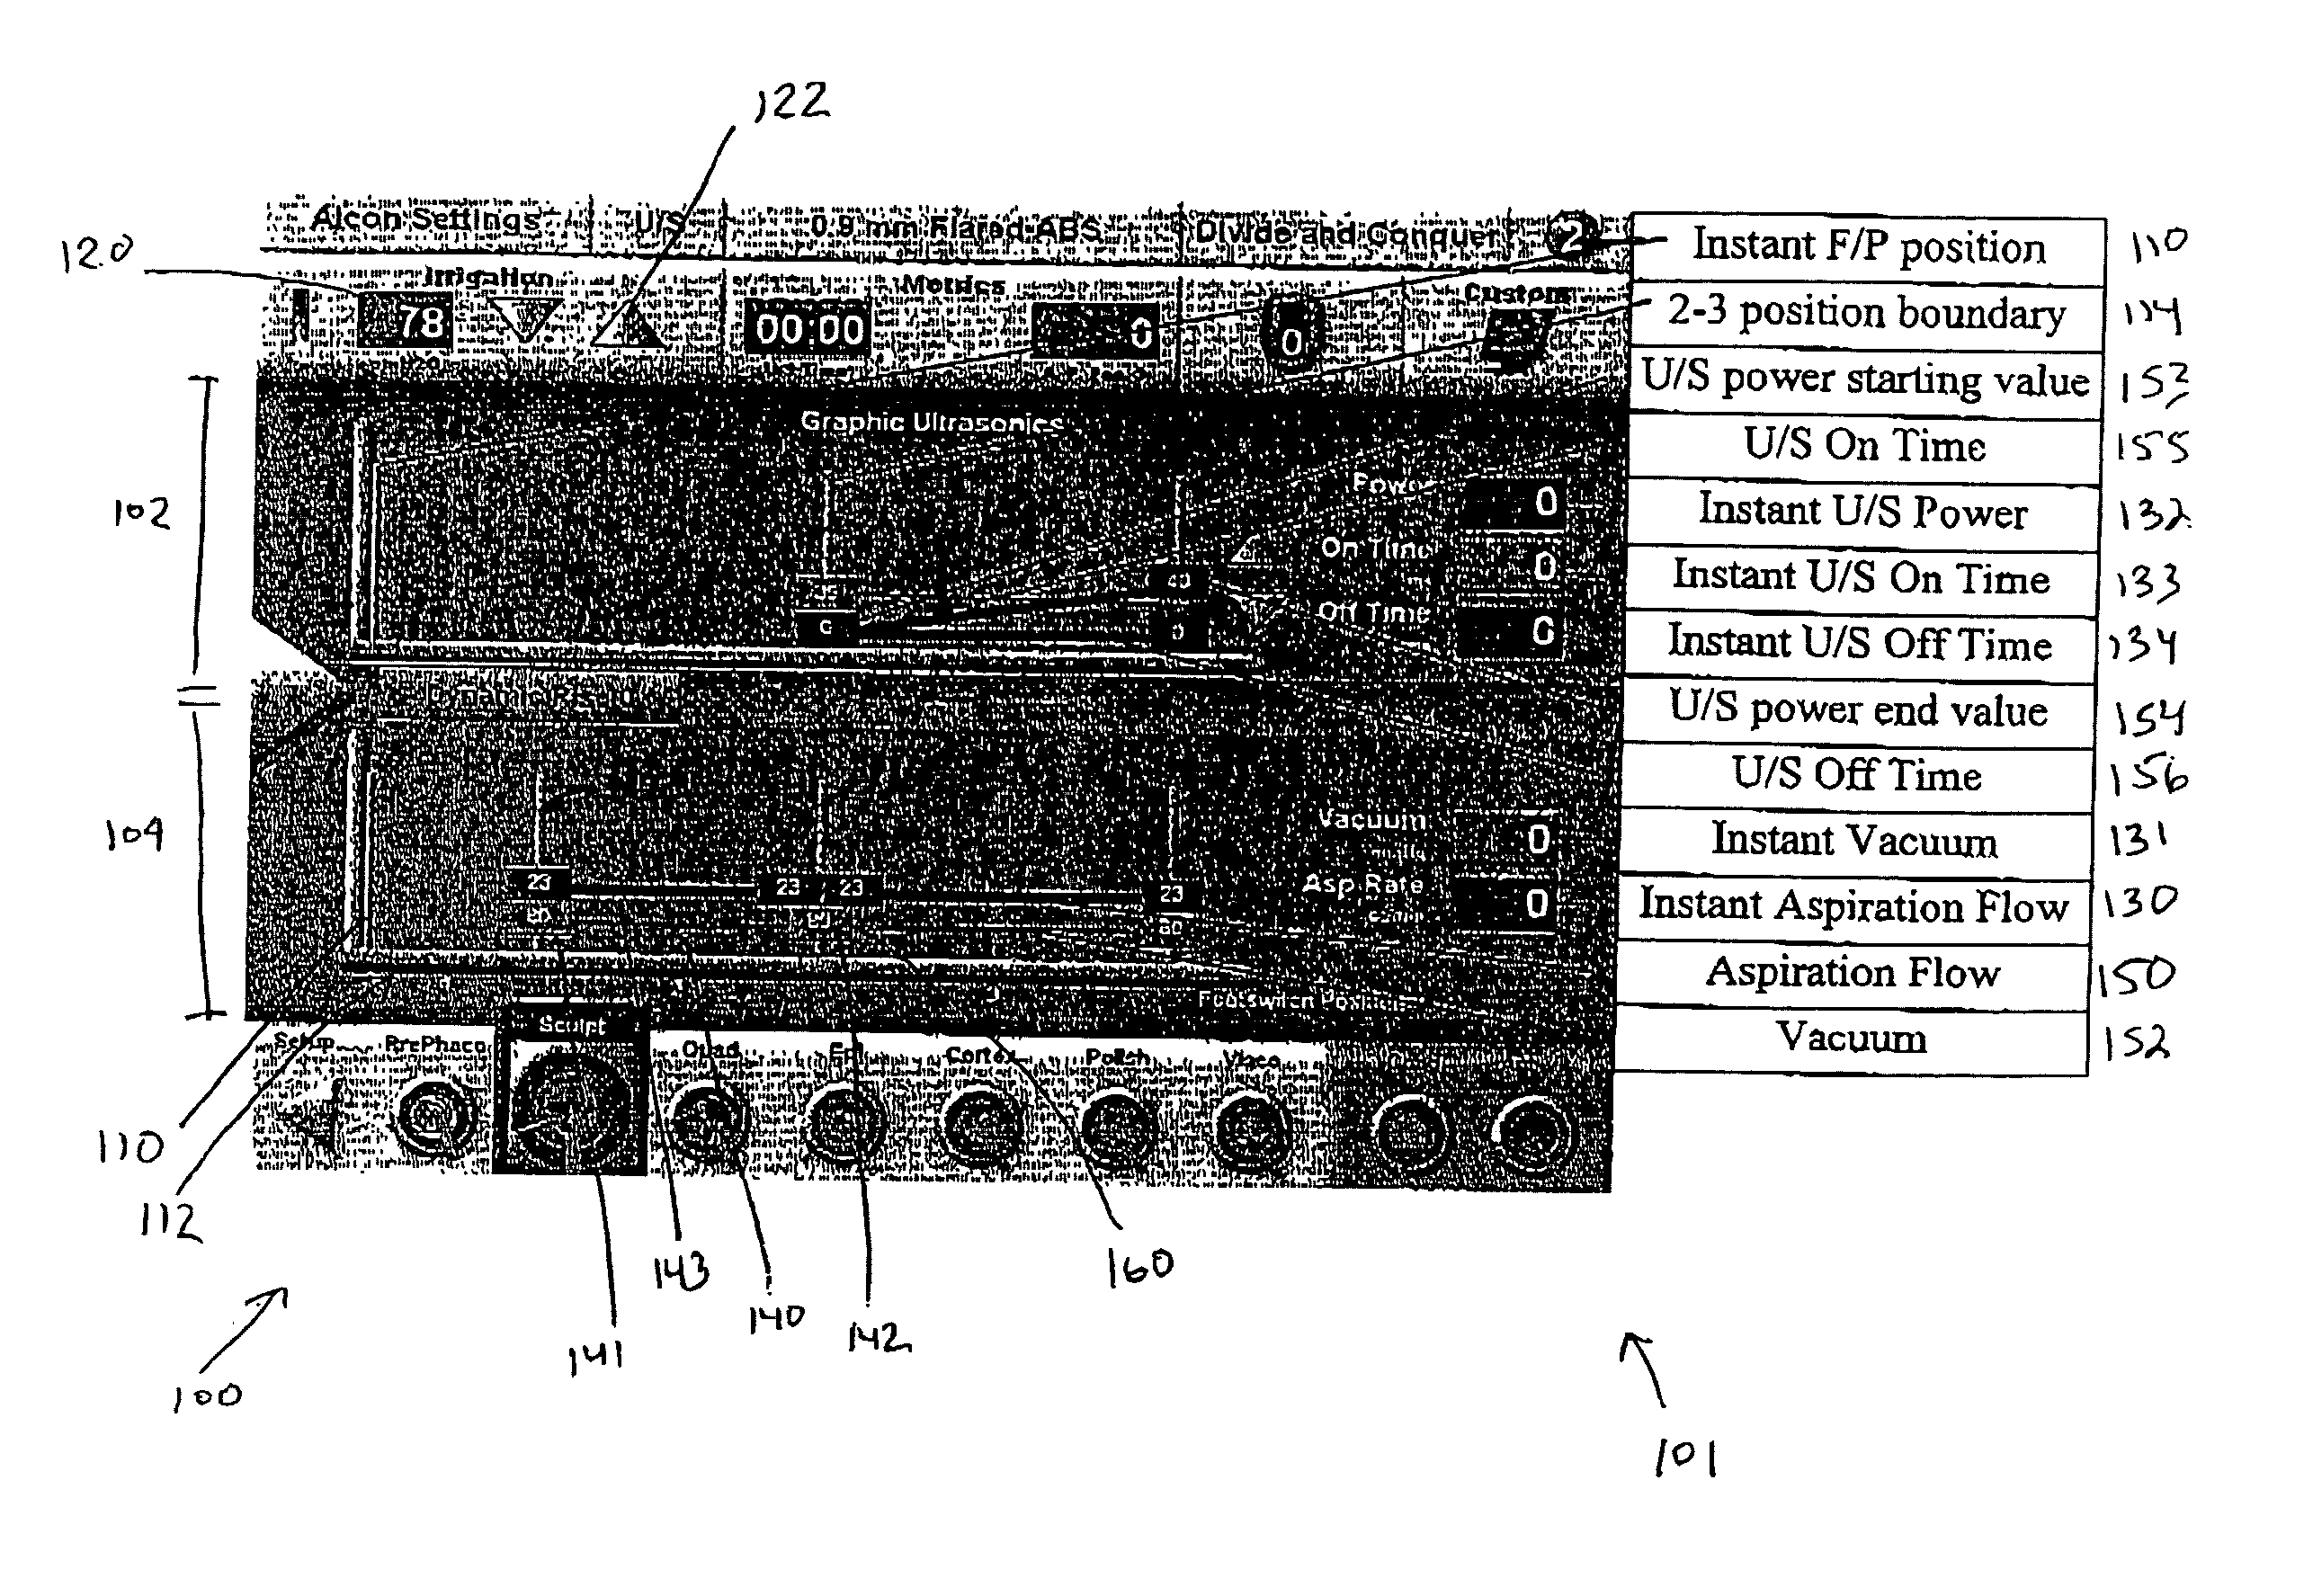 Graphical user interface system and method for representing and controlling surgical parameters